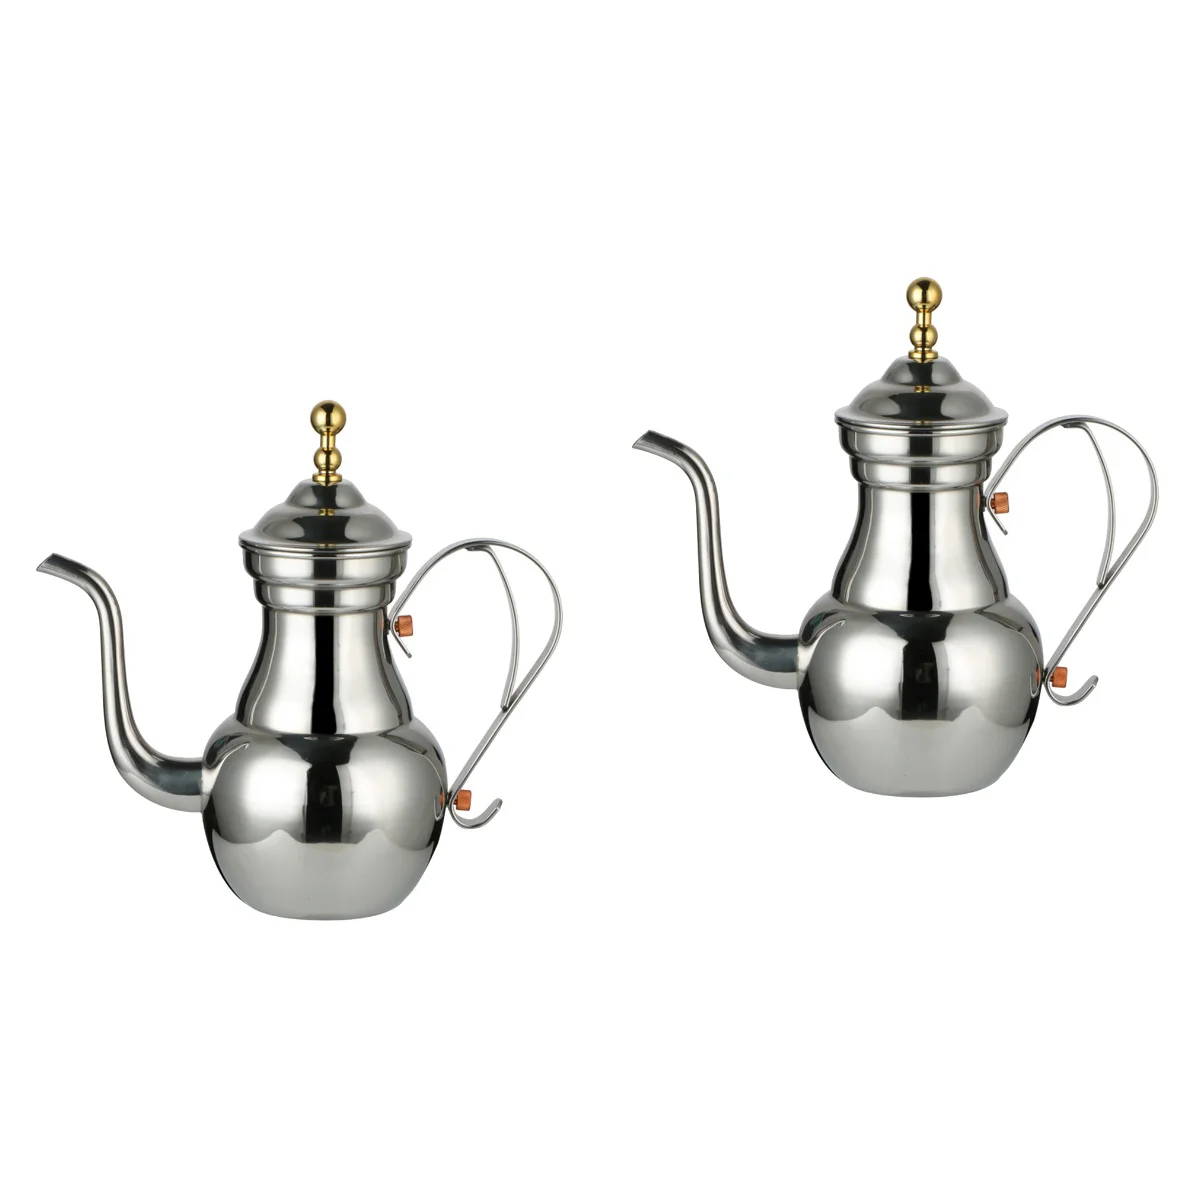 

Kettle Tea Coffee Teapot Stainless Steel Pour Espresso Boiling Over Water Pot Pitcher Filter Pots Stove Stovetop Lemonade